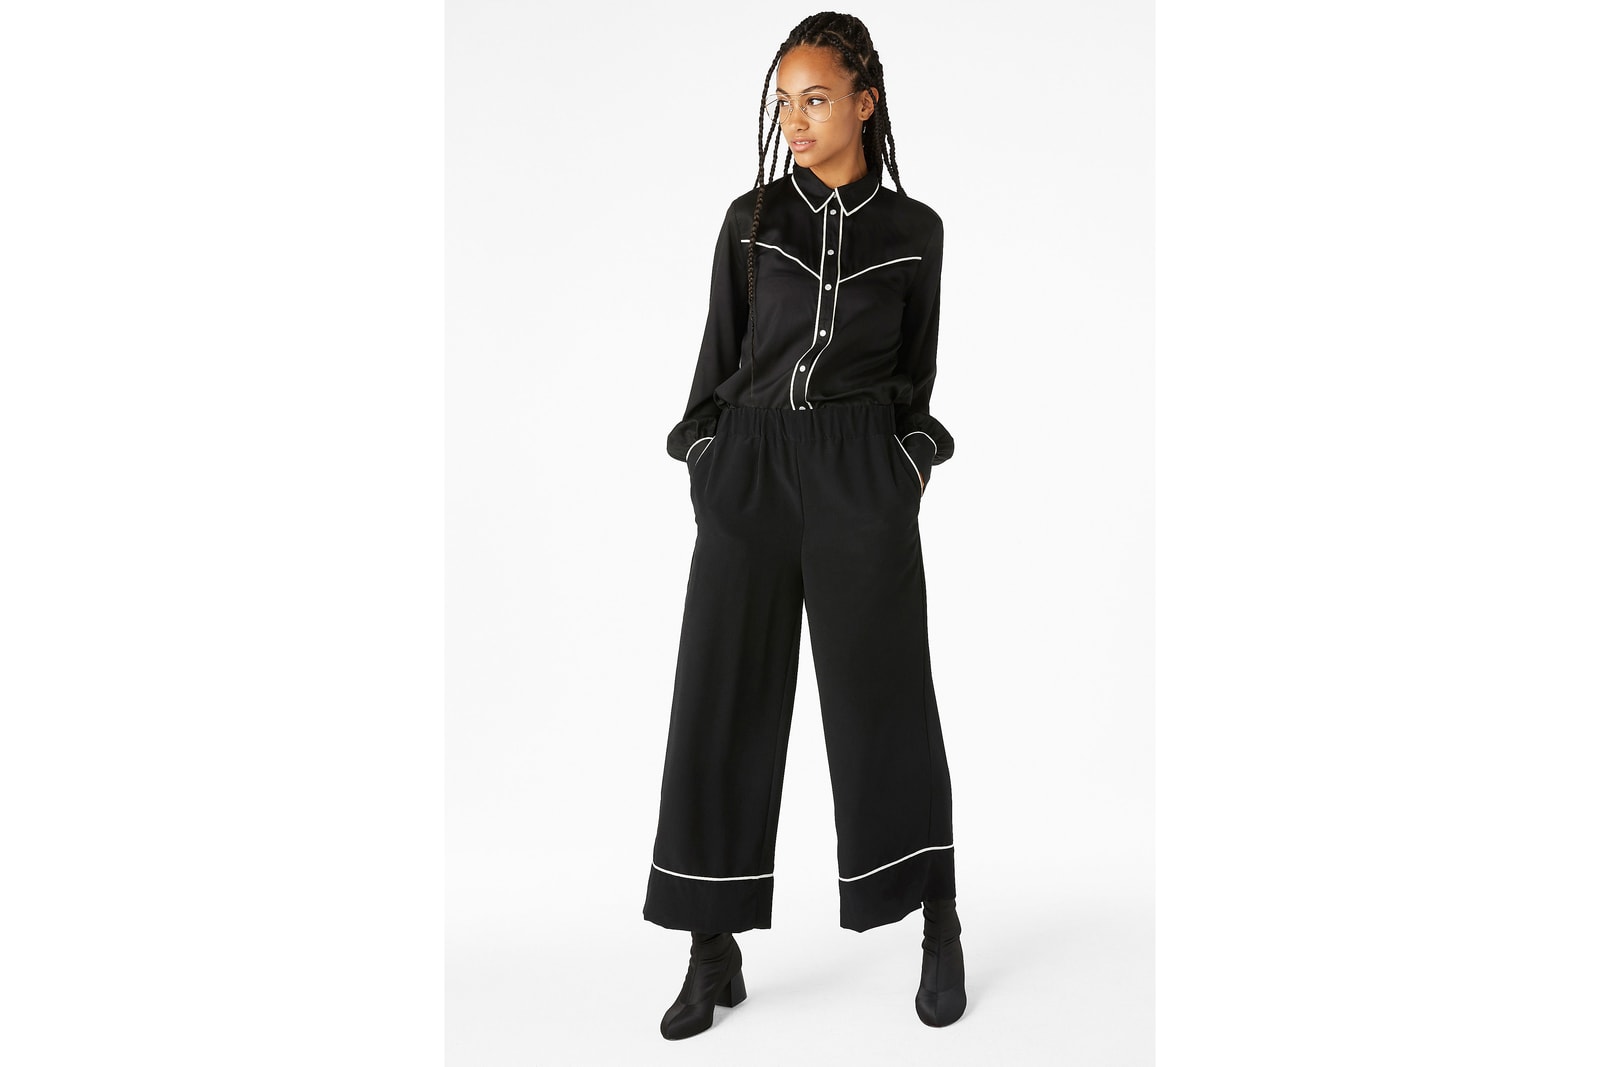 Editors Guide Style Guide Outfit Inspiration Fashion Pyjamas Pajamas Silk Satin Aritzia Dr. Martens Everlane Gucci Monki Uniqlo Jewelry Style Get The Look Trend